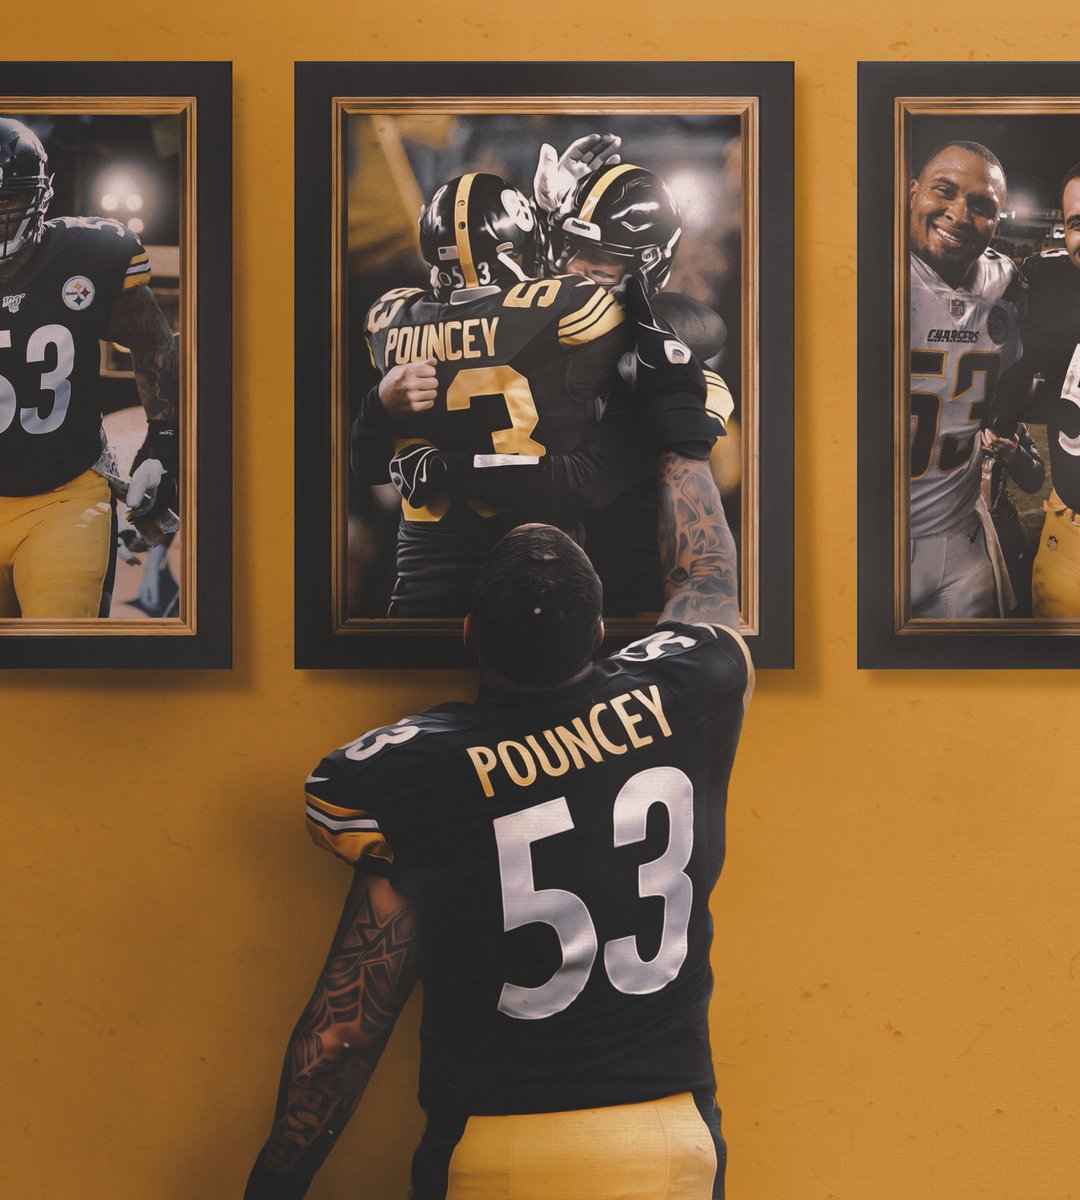 Here is a new design ft. @MaurkicePouncey! Maurkice recently announced his retirement; he was close with a lot of guys over the years but none quite like Big Ben. I wanted to commemorate Pouncey’s career and him & Ben’s friendship over the years. Hope you guys like it! 👍